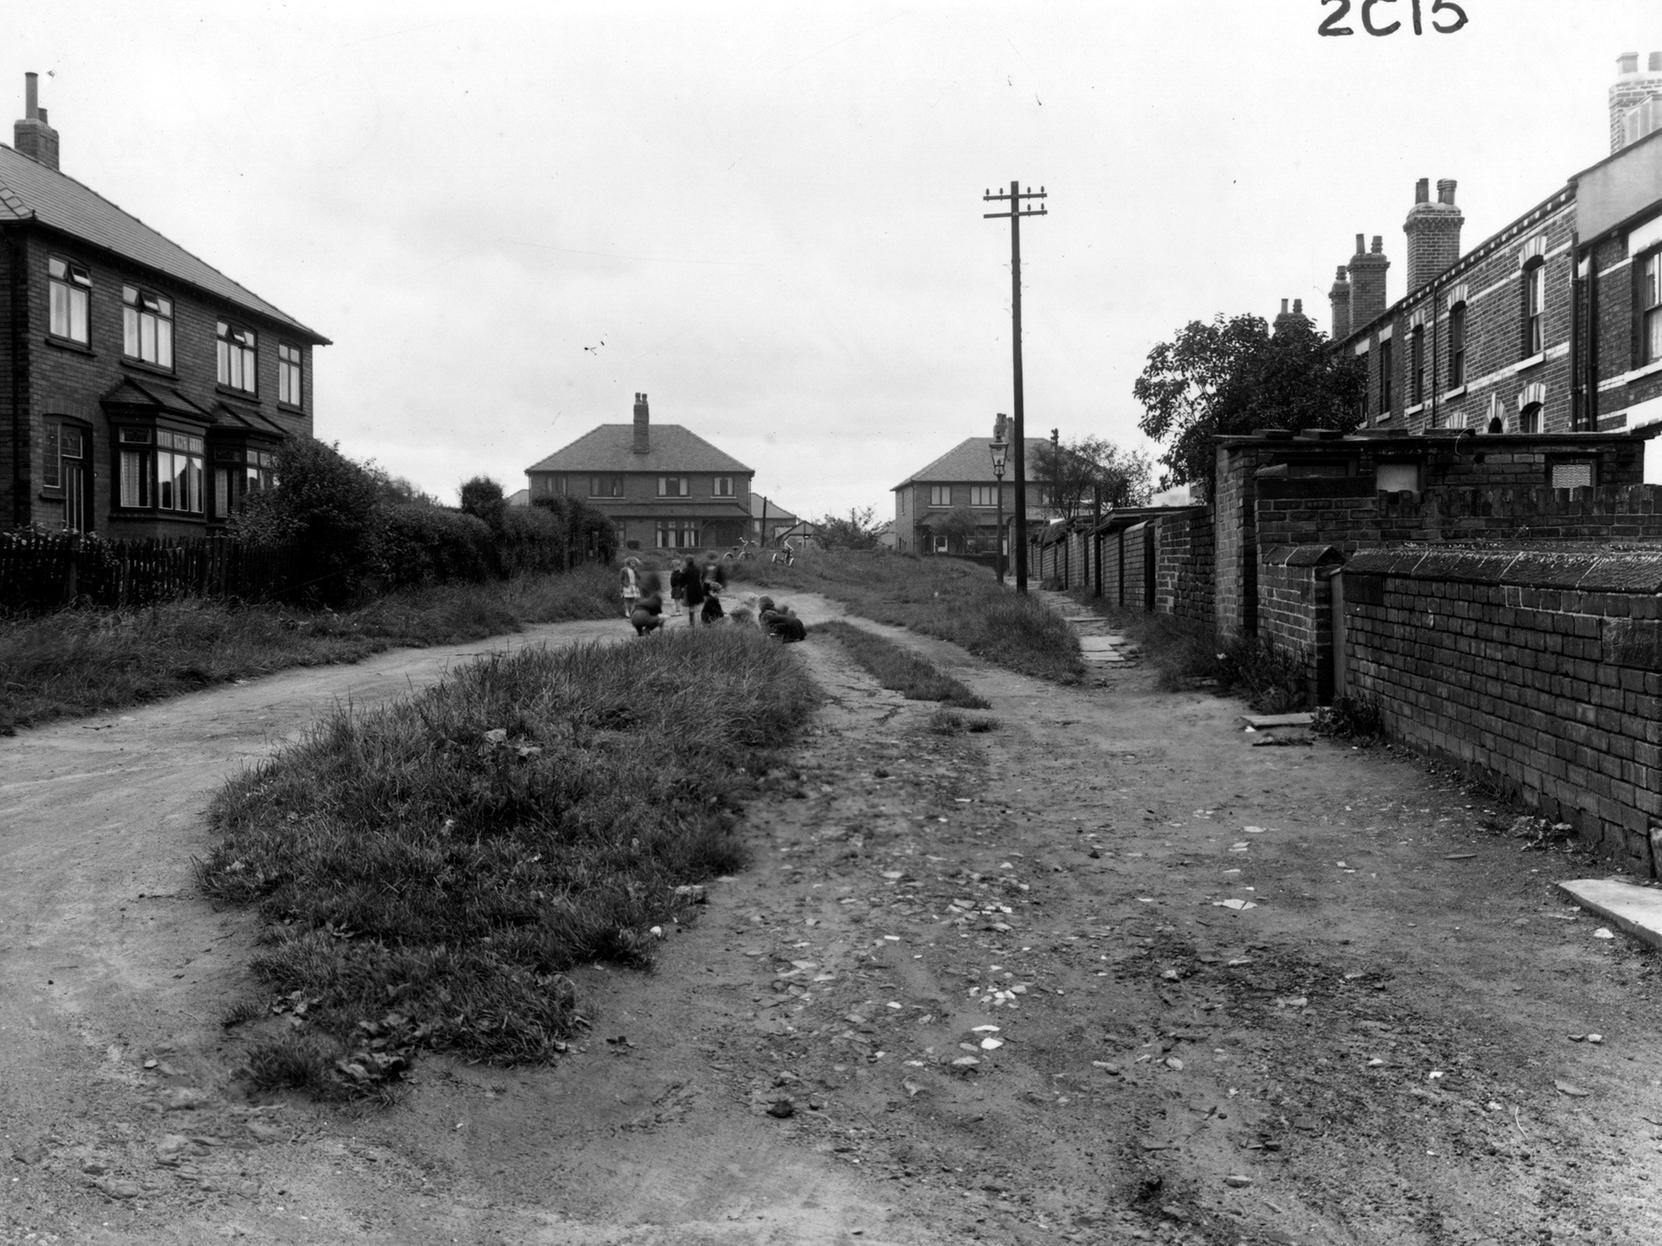 Back Mount Pleasant in Middleton looking west onto Lingwell Crescent. Children are playing in the street, with a bicycle and tricycle in the background.